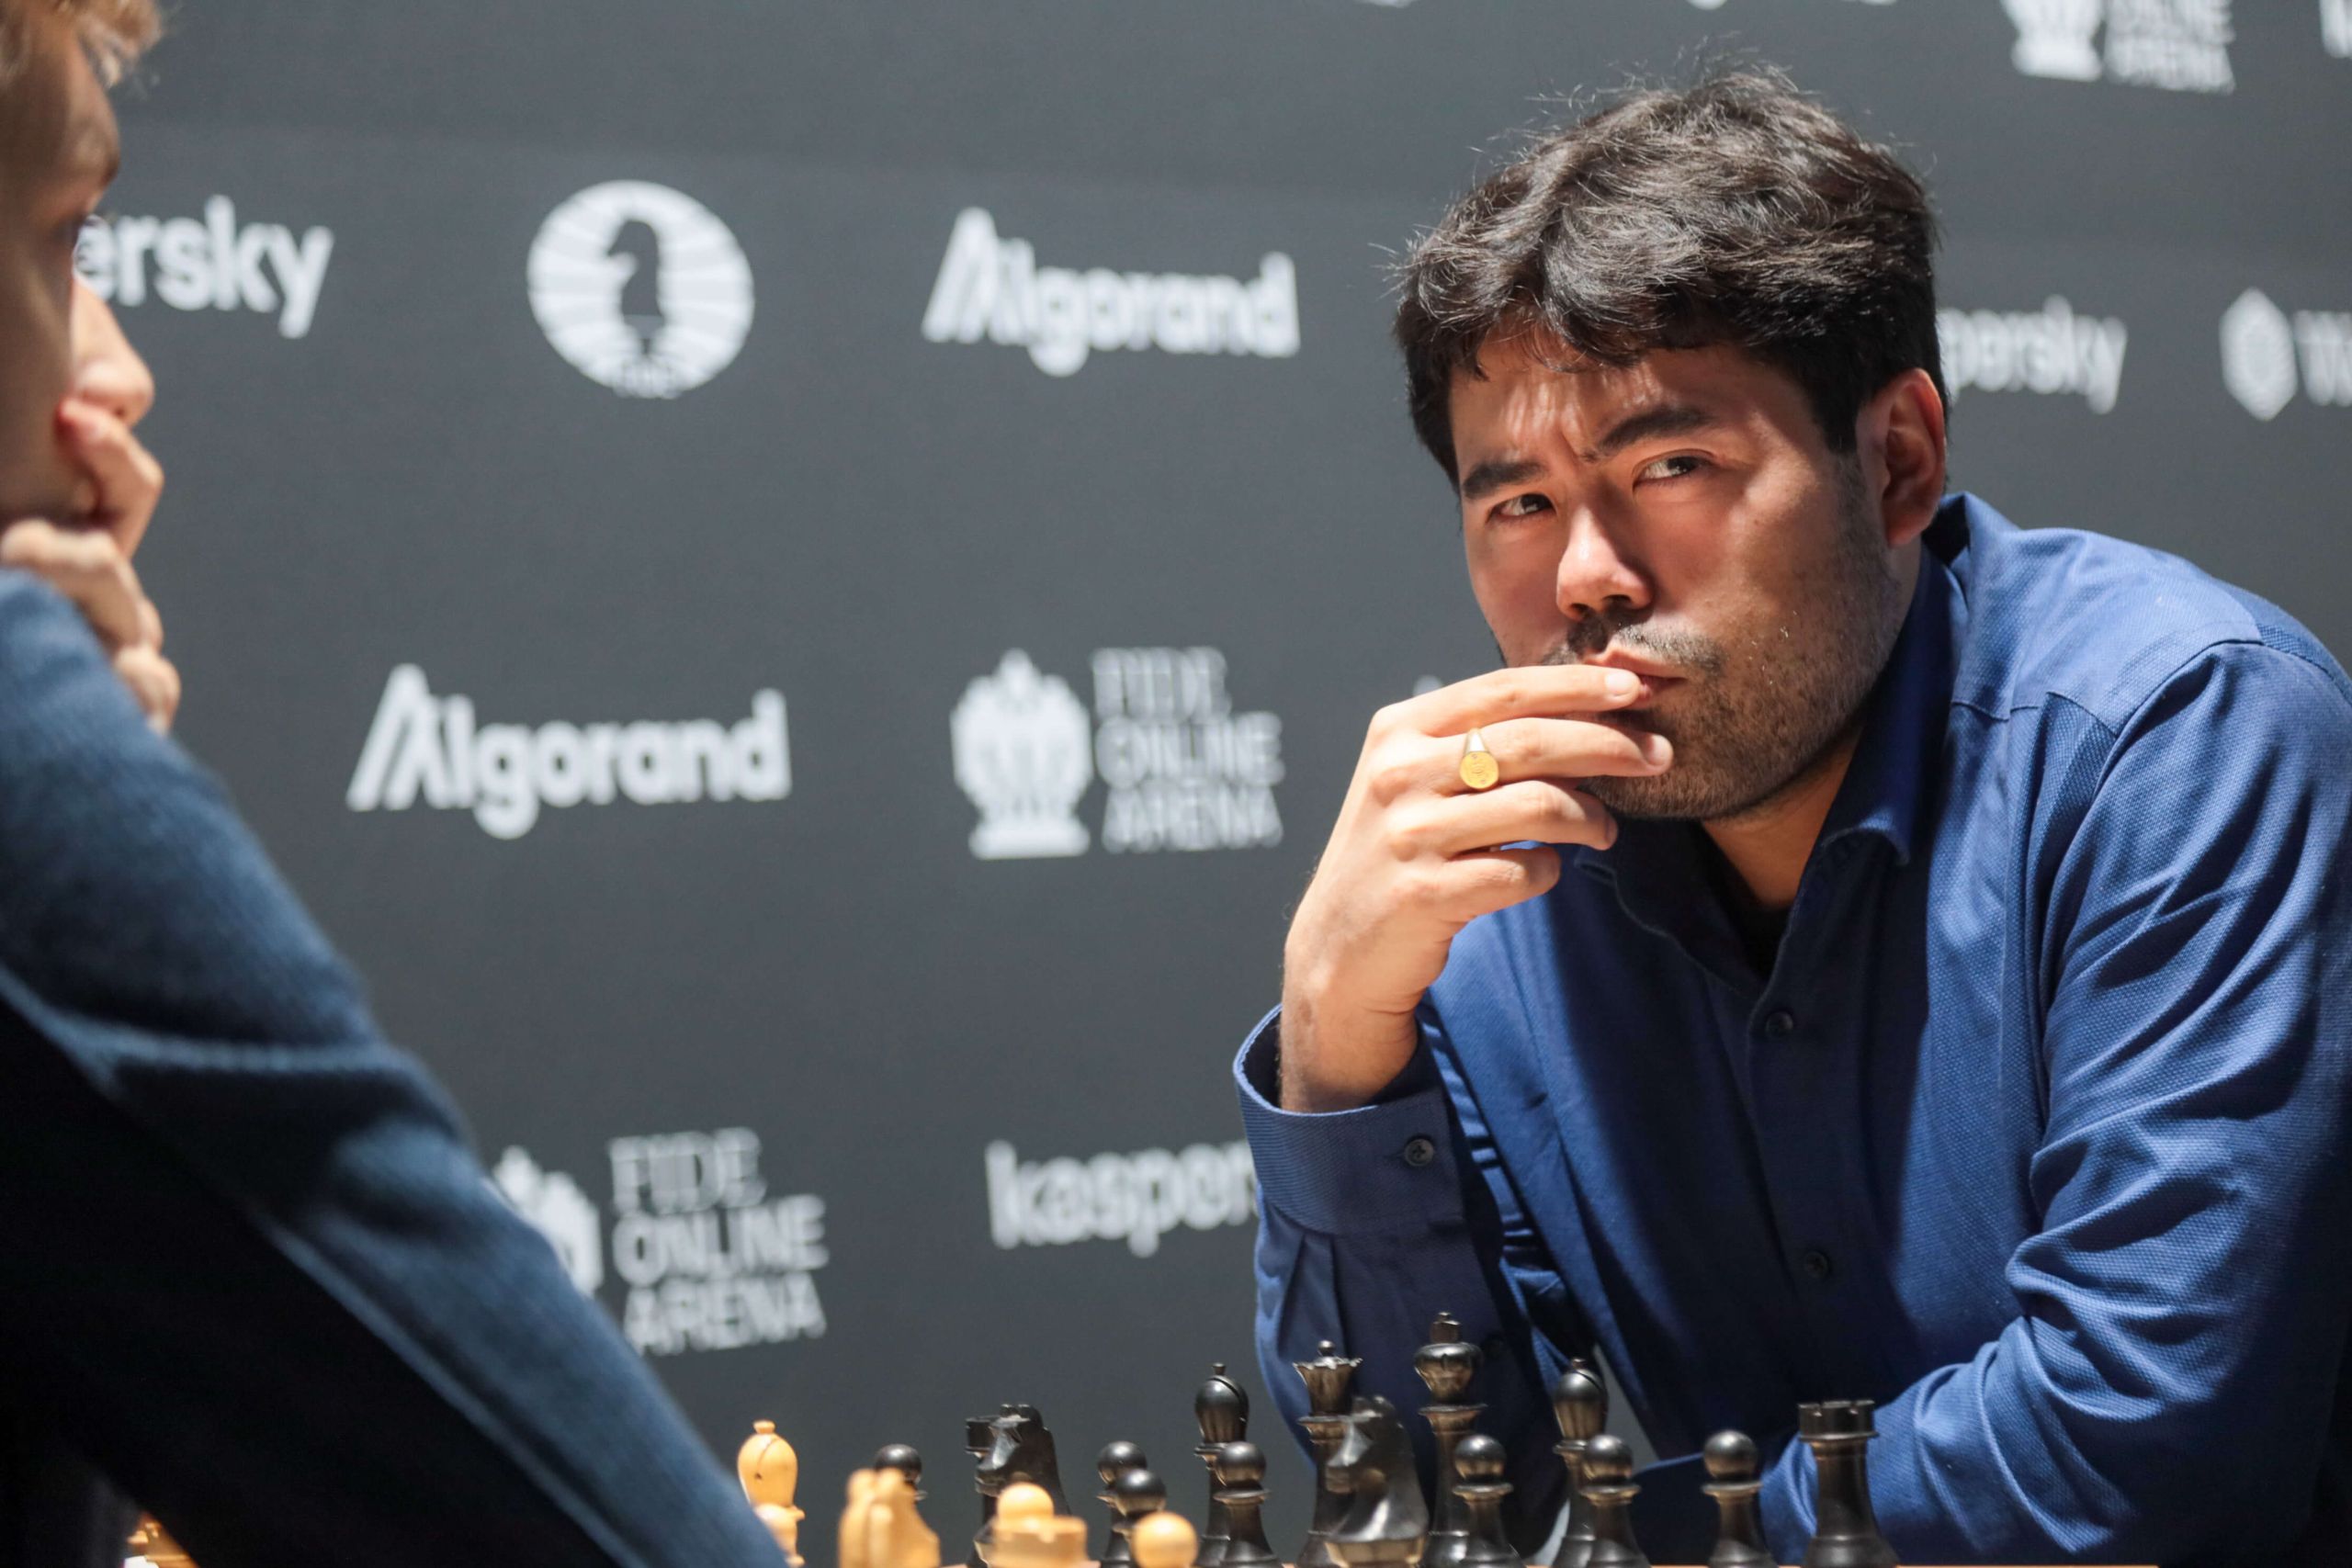 Kasparov Says Ding Liren is the Favorite To Win the Candidates